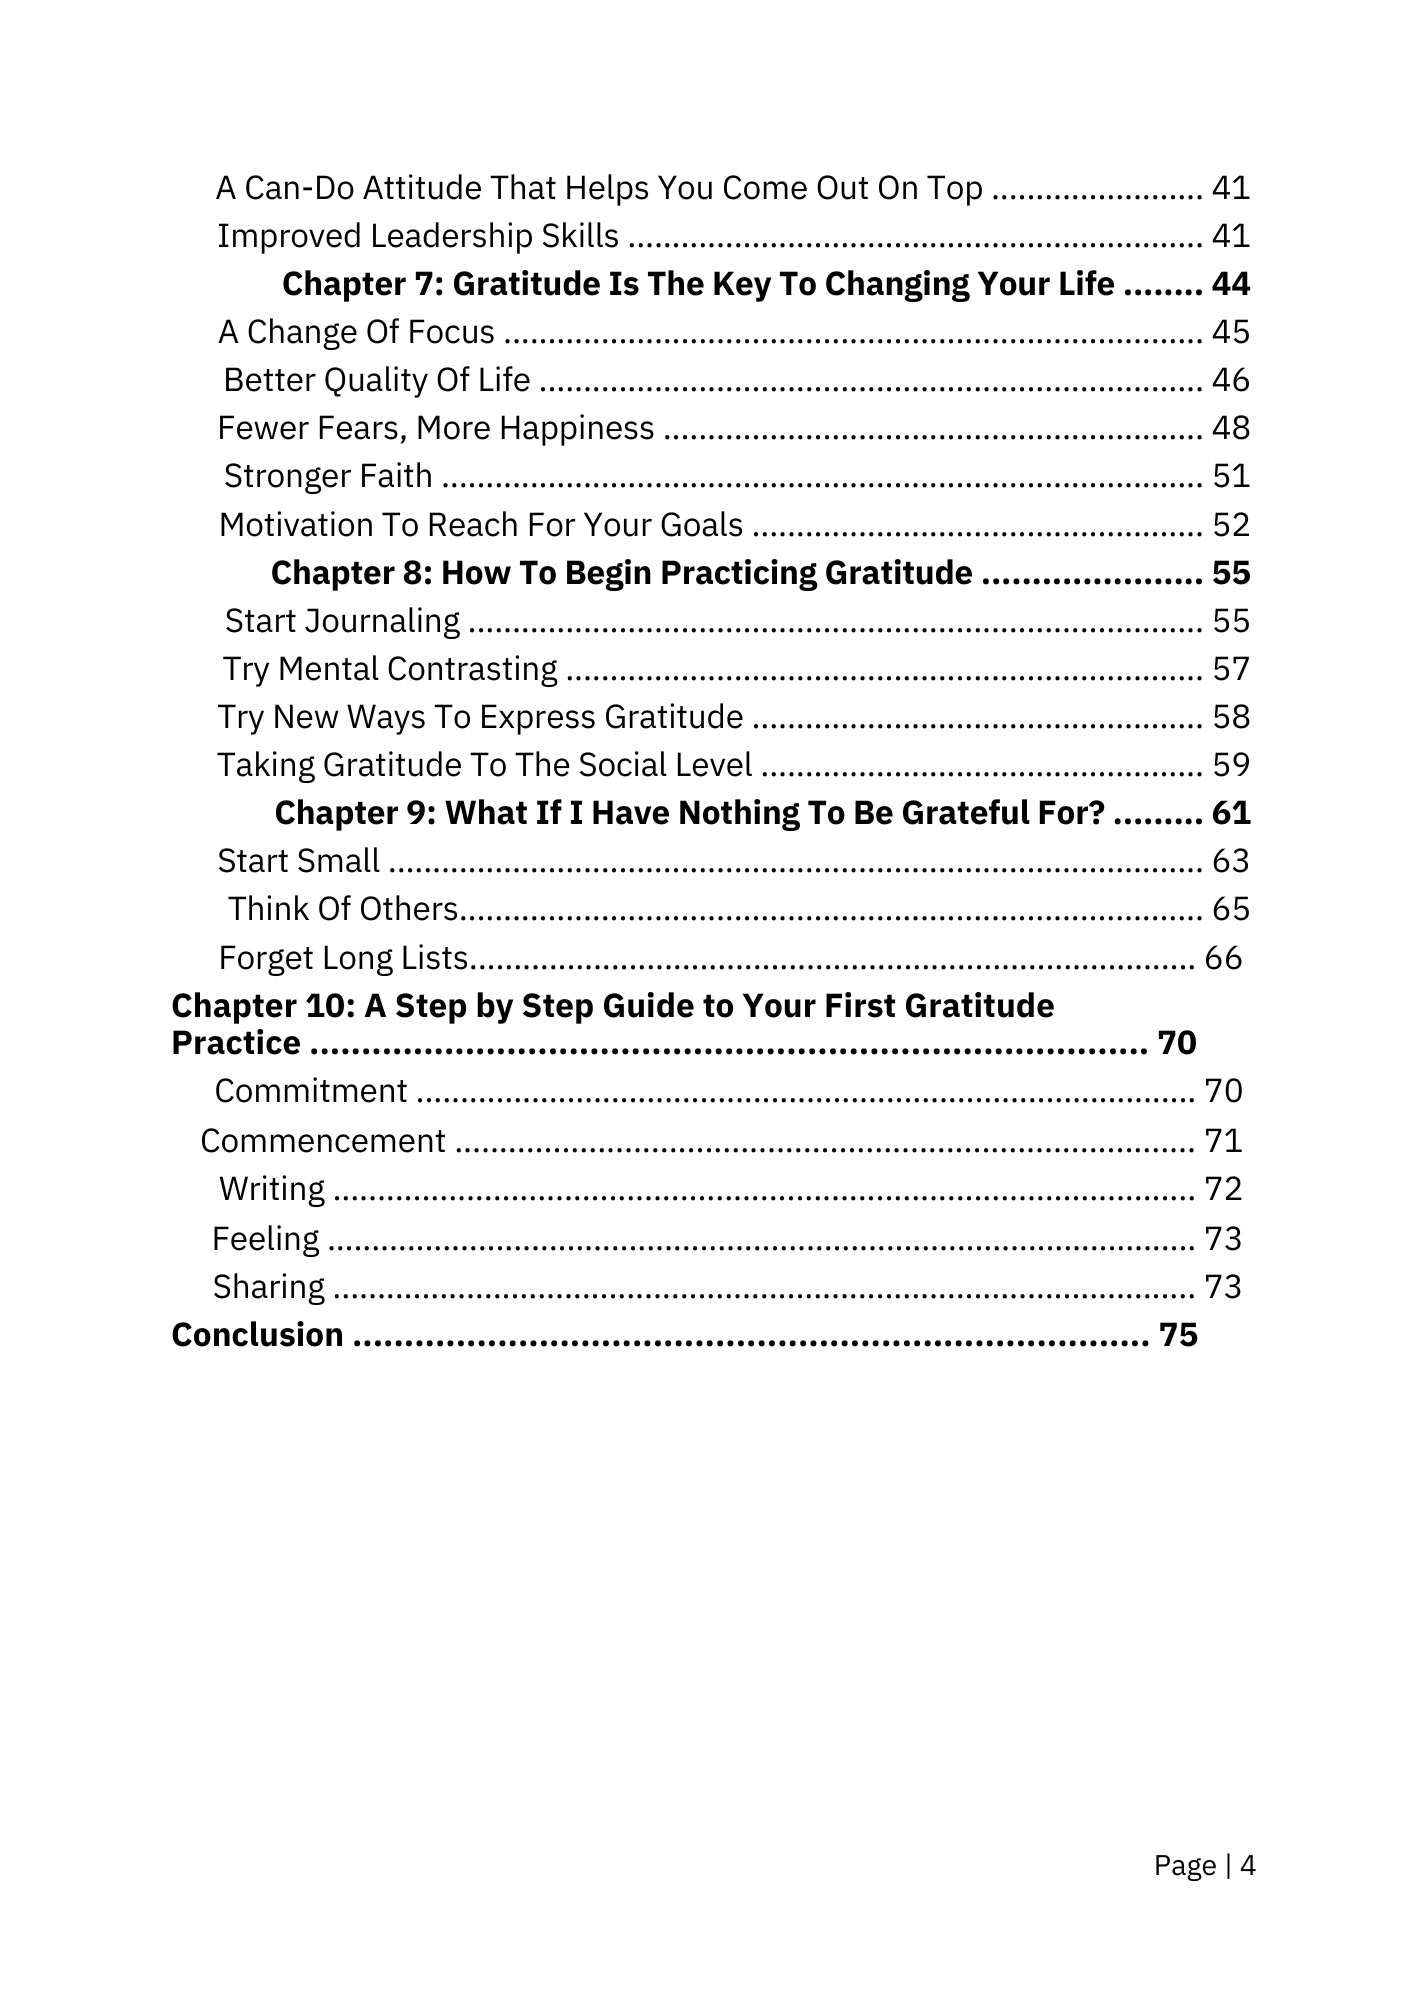 Gift of Gratitude PDF Ebook How to be Grateful - Download Delight